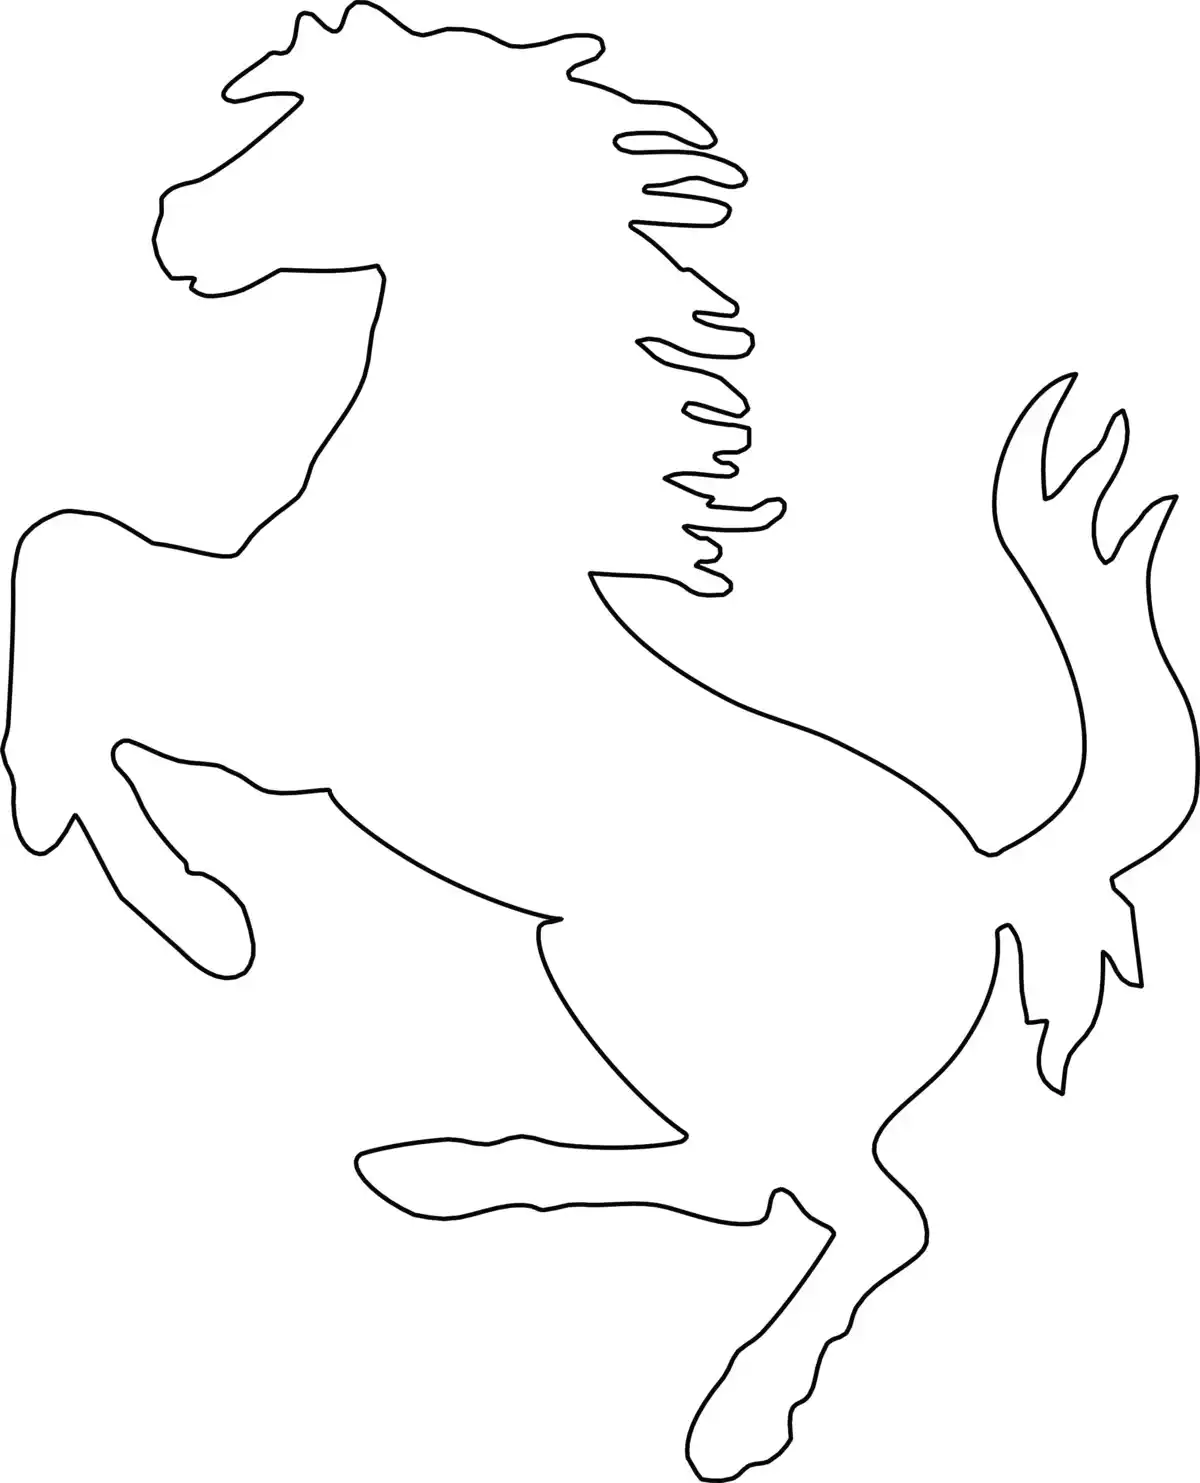 Free Coloring Pages PDF, Horse Galloping Silhouette Kids Coloring Pages Pdf